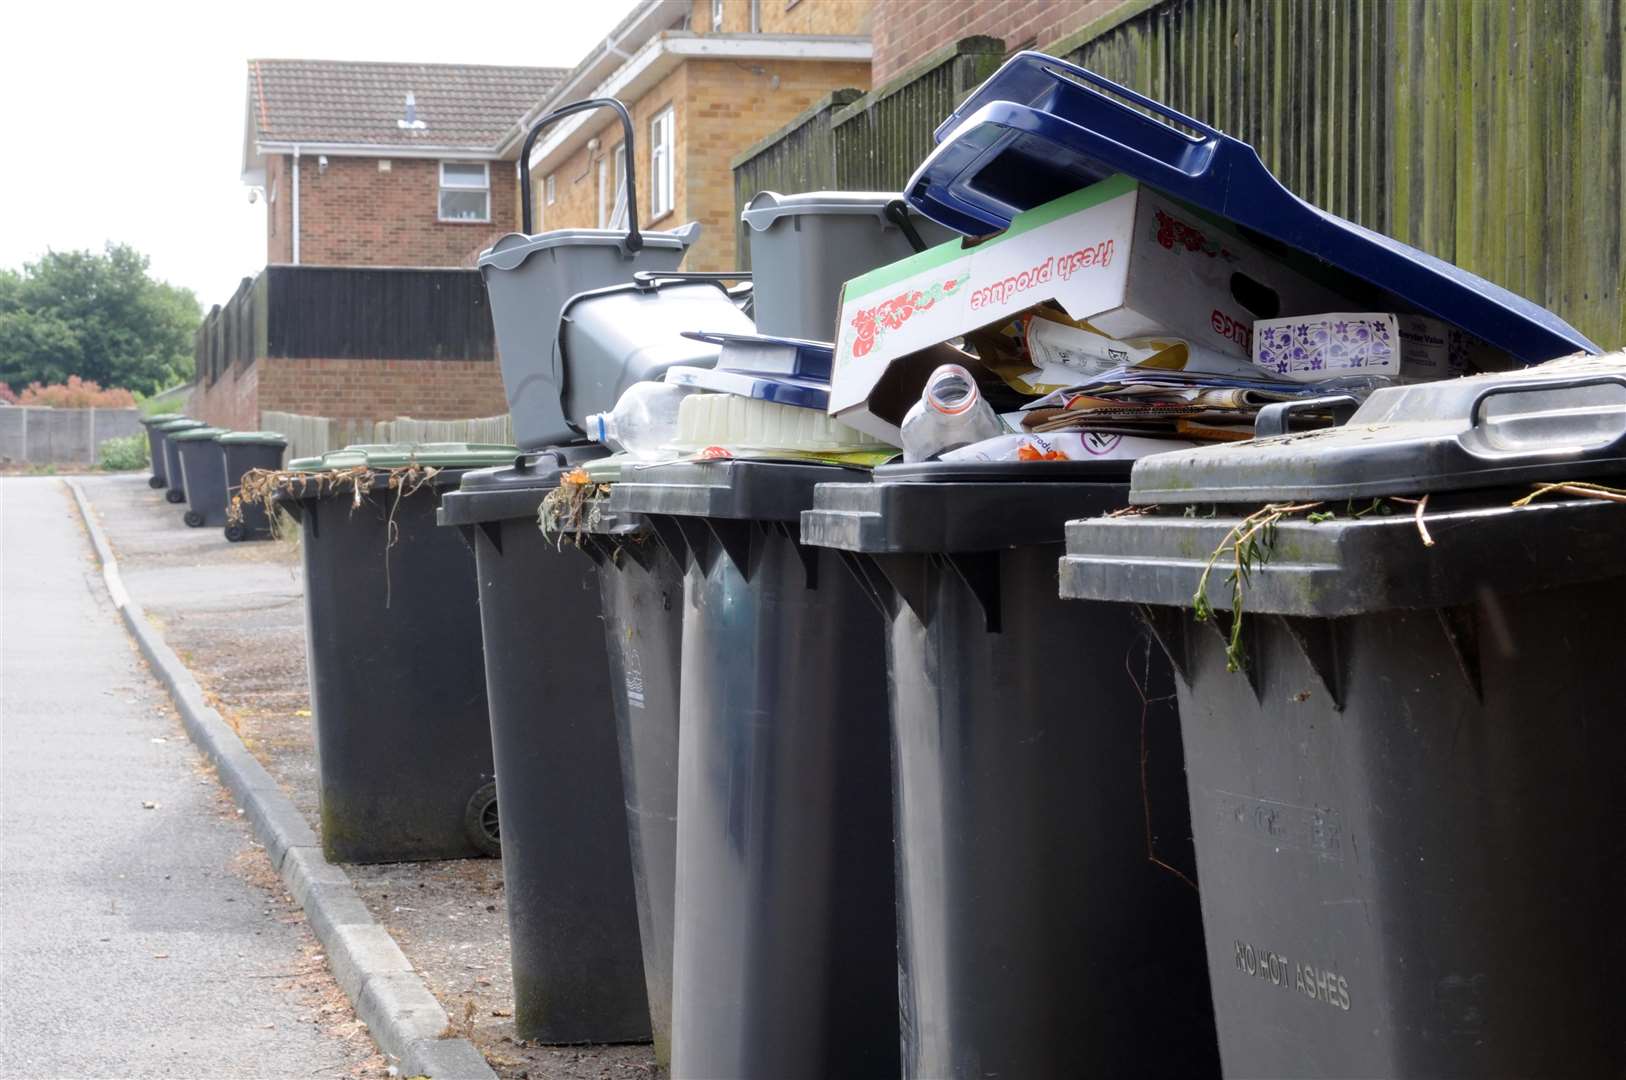 Bins have been left overflowing during the latest refuse worker strike